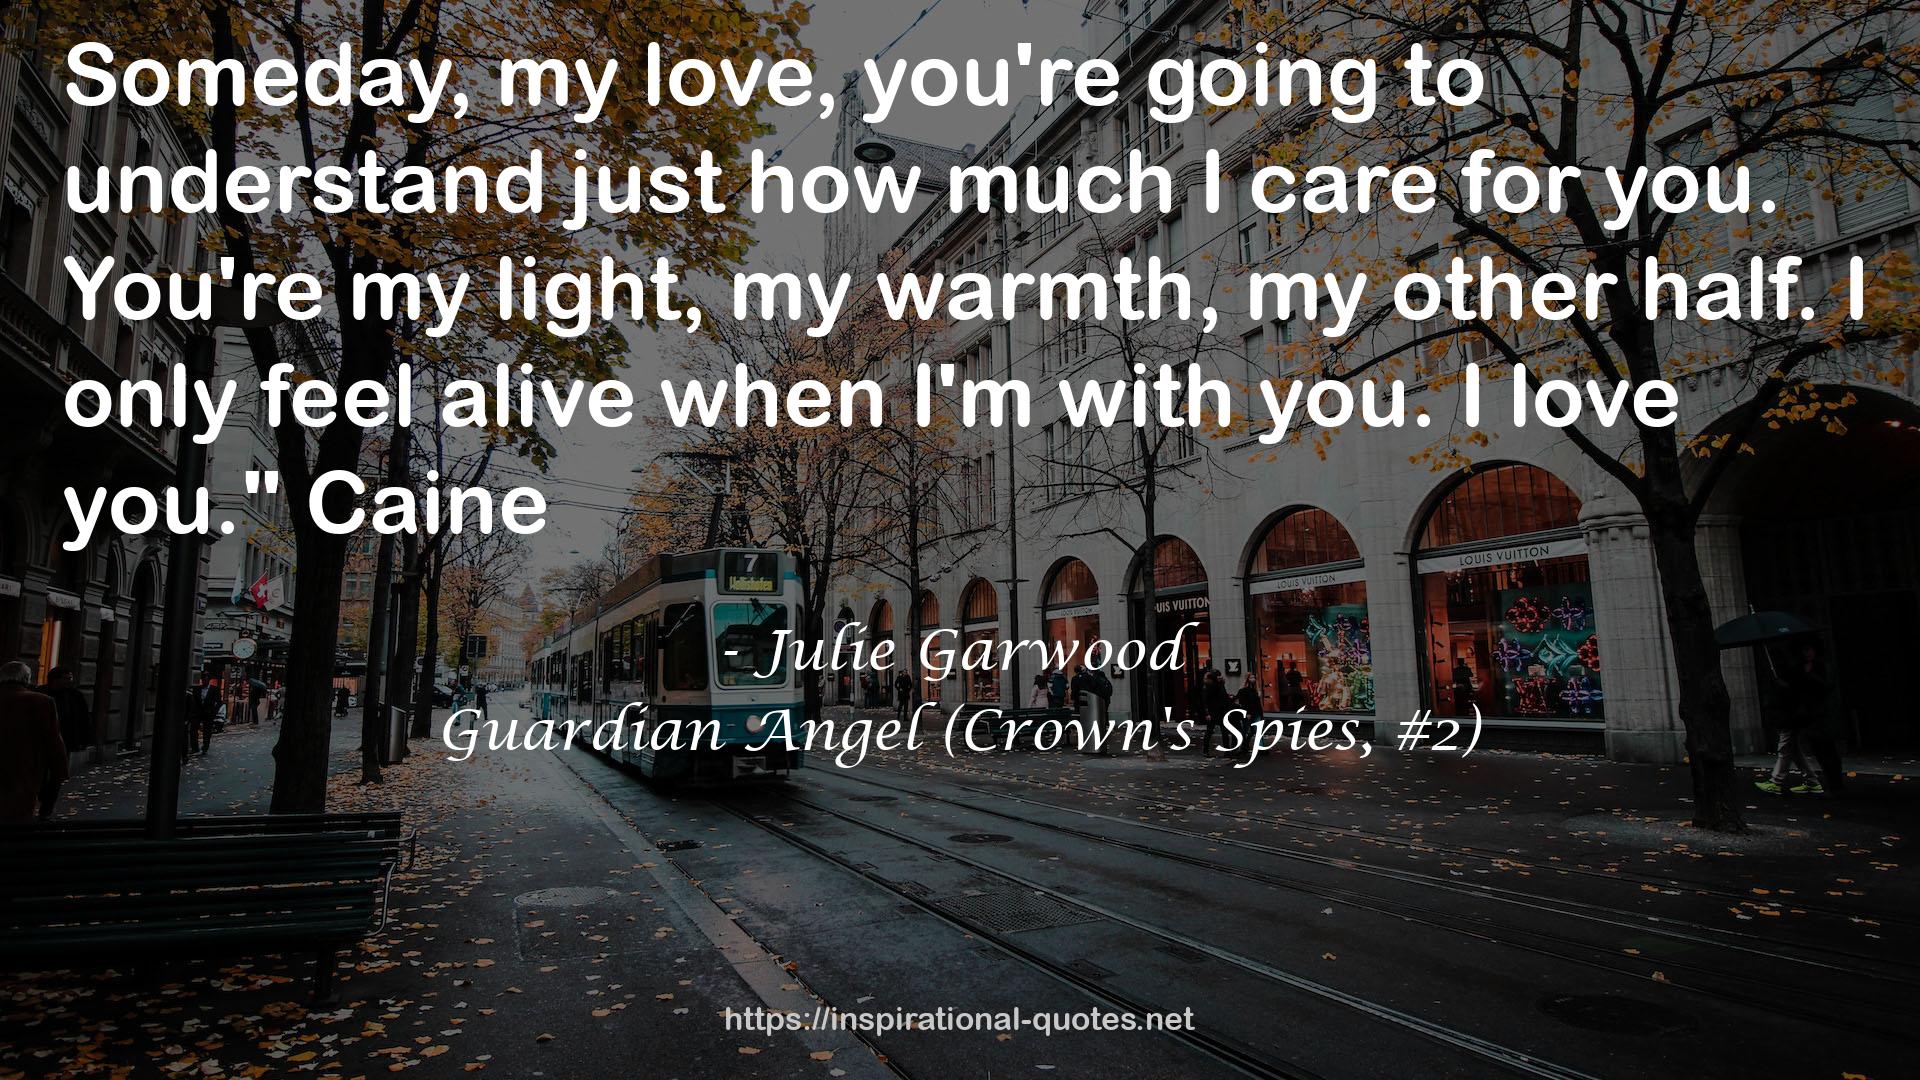 Guardian Angel (Crown's Spies, #2) QUOTES